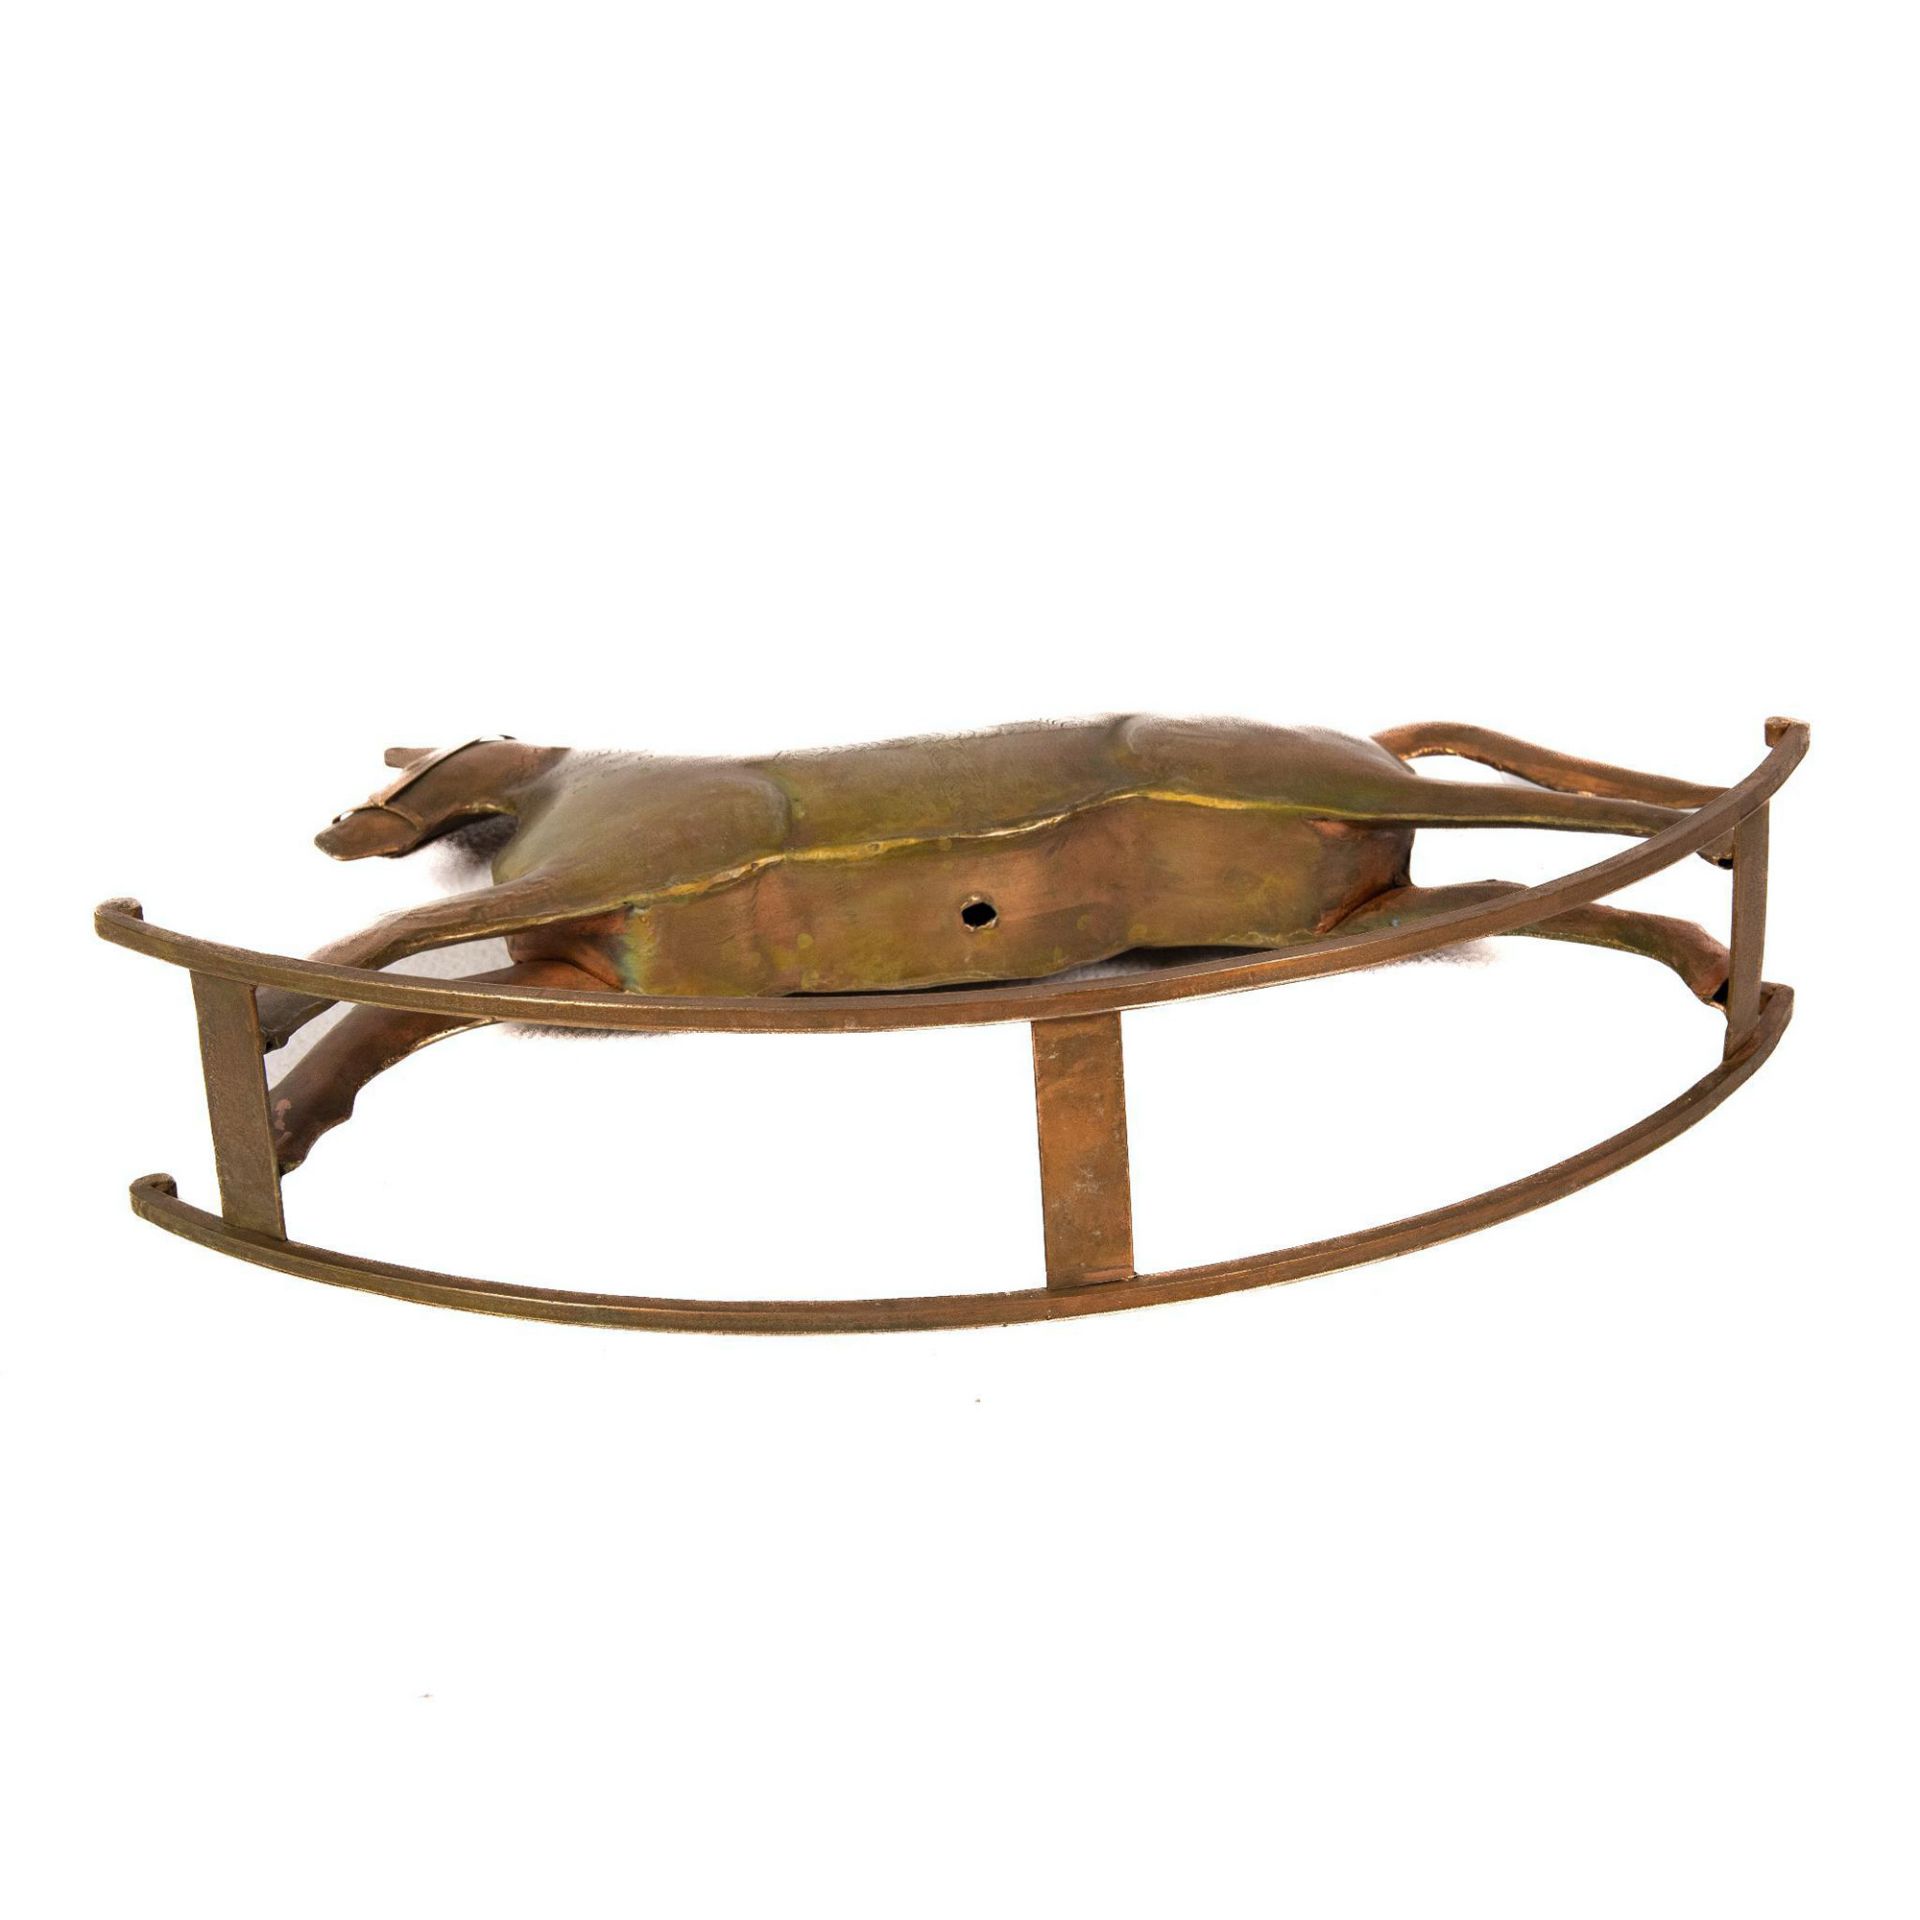 Decorative Copper Hand-Crafted Rocking Horse - Image 4 of 4